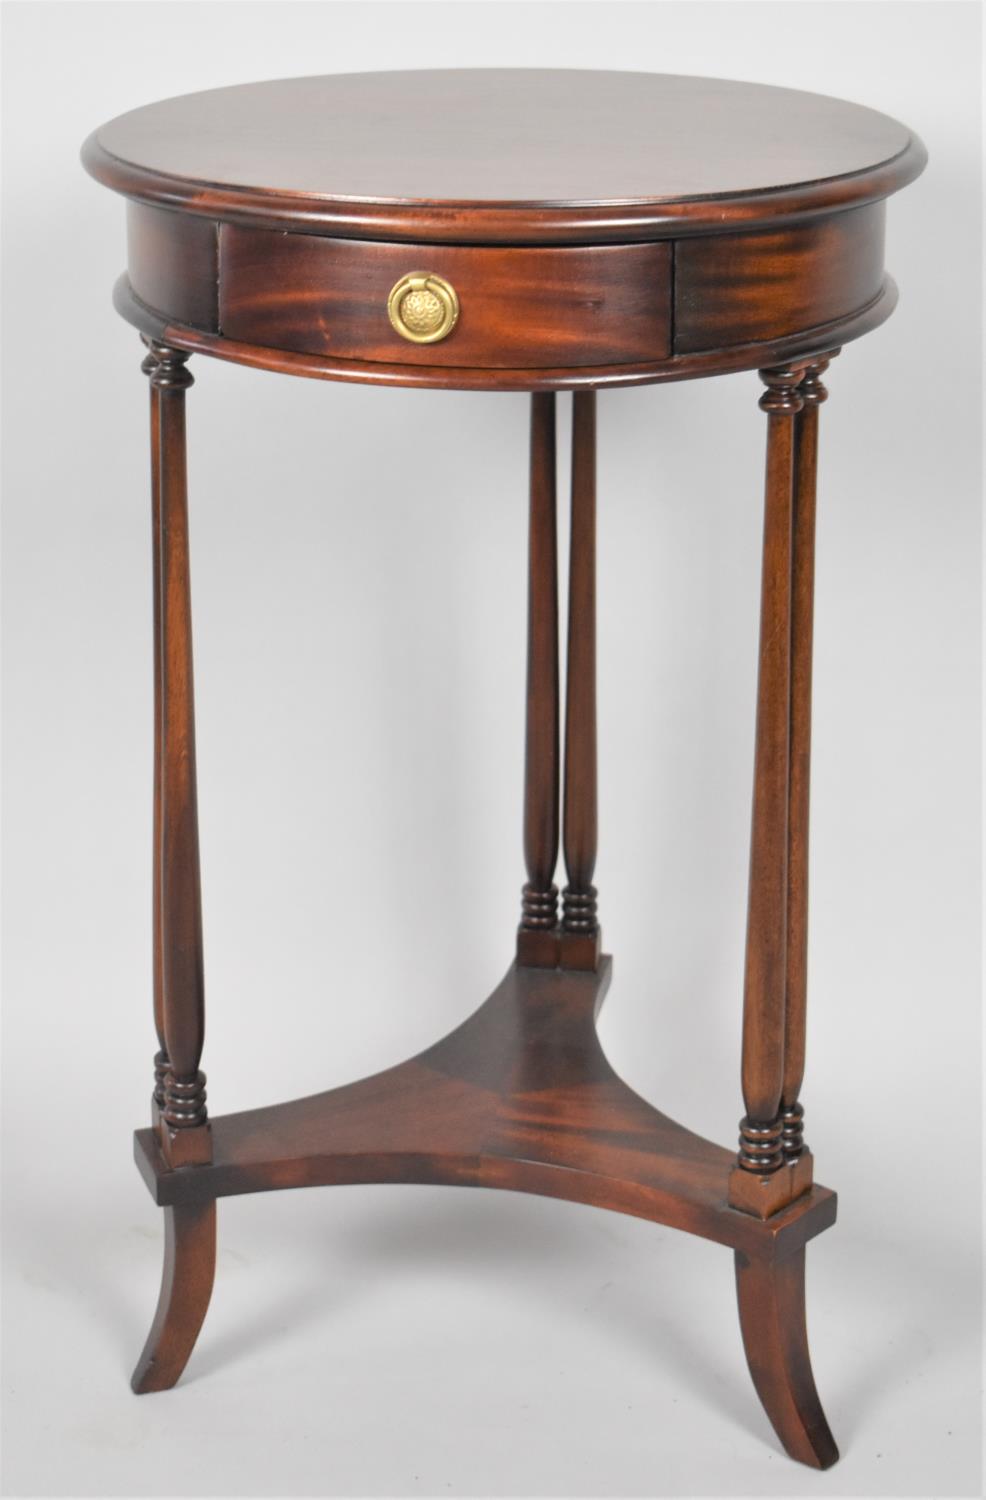 A Modern Circular Topped Mahogany Drum Table with Single Drawer, 44cm Diameter